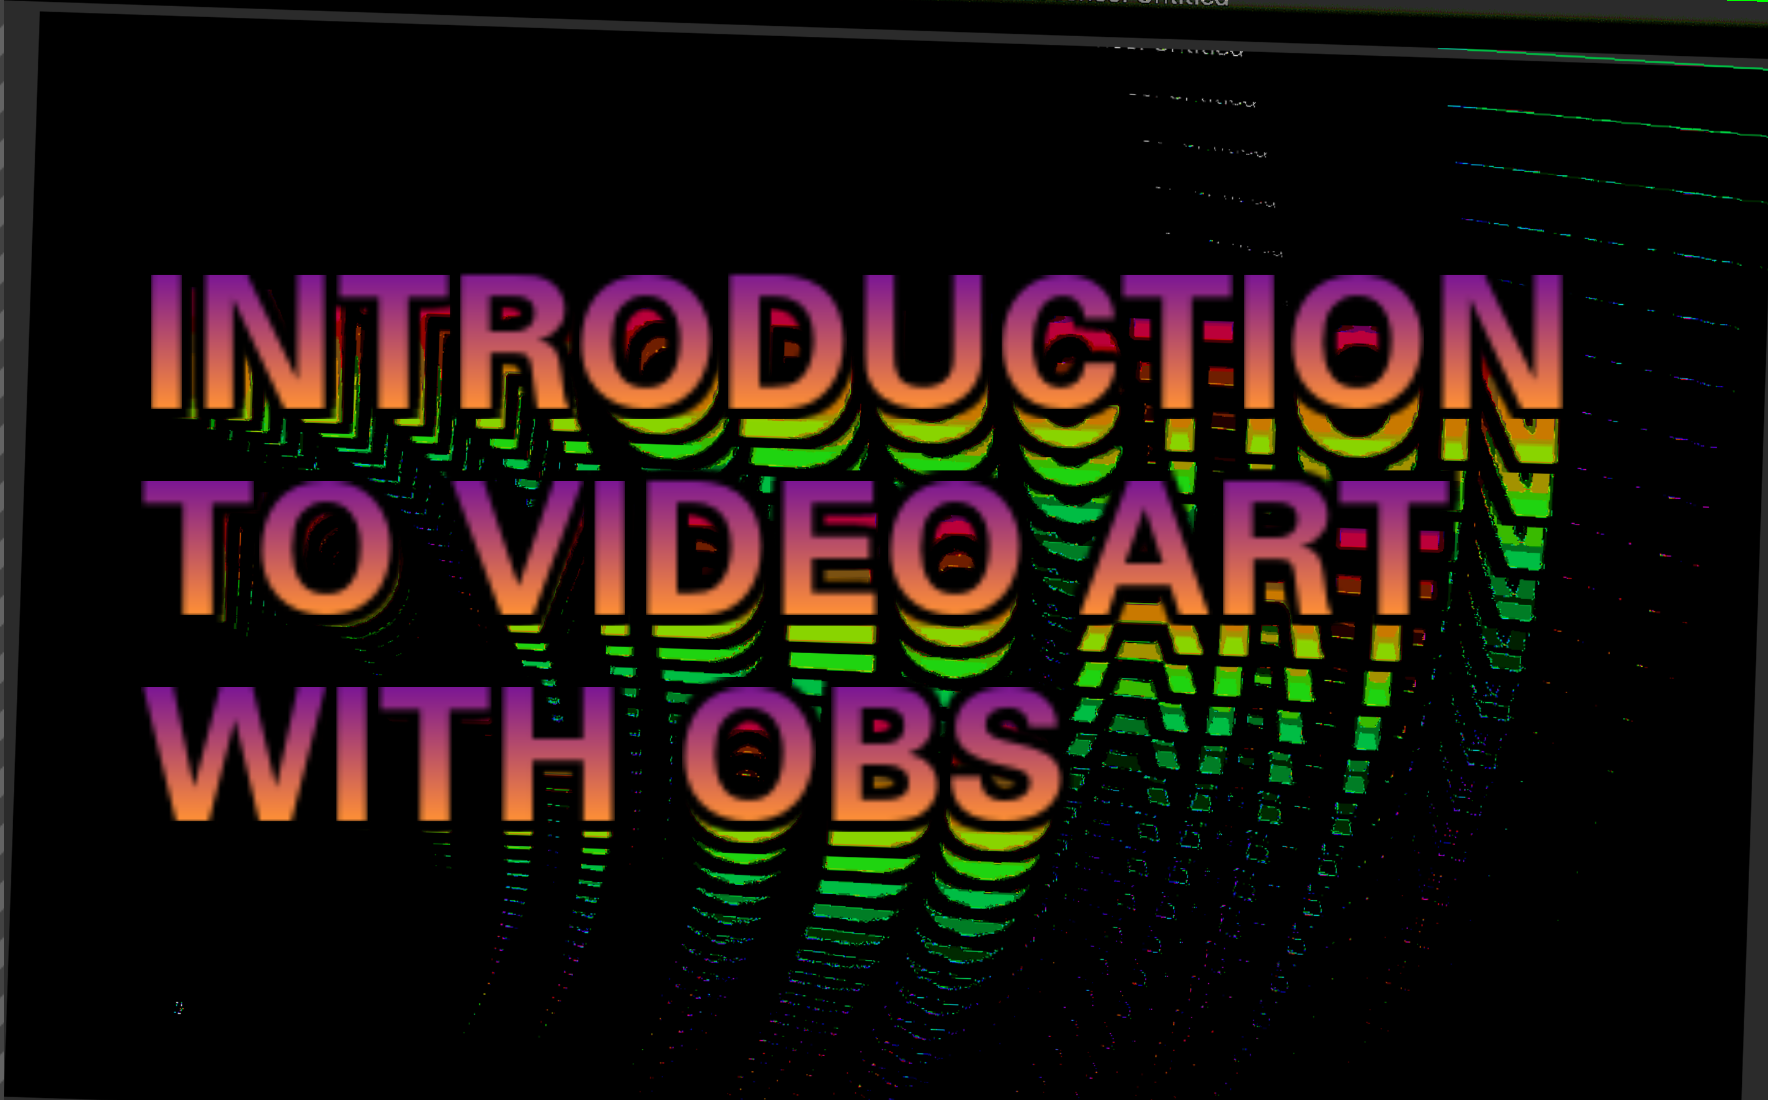 Introduction to video art with obs